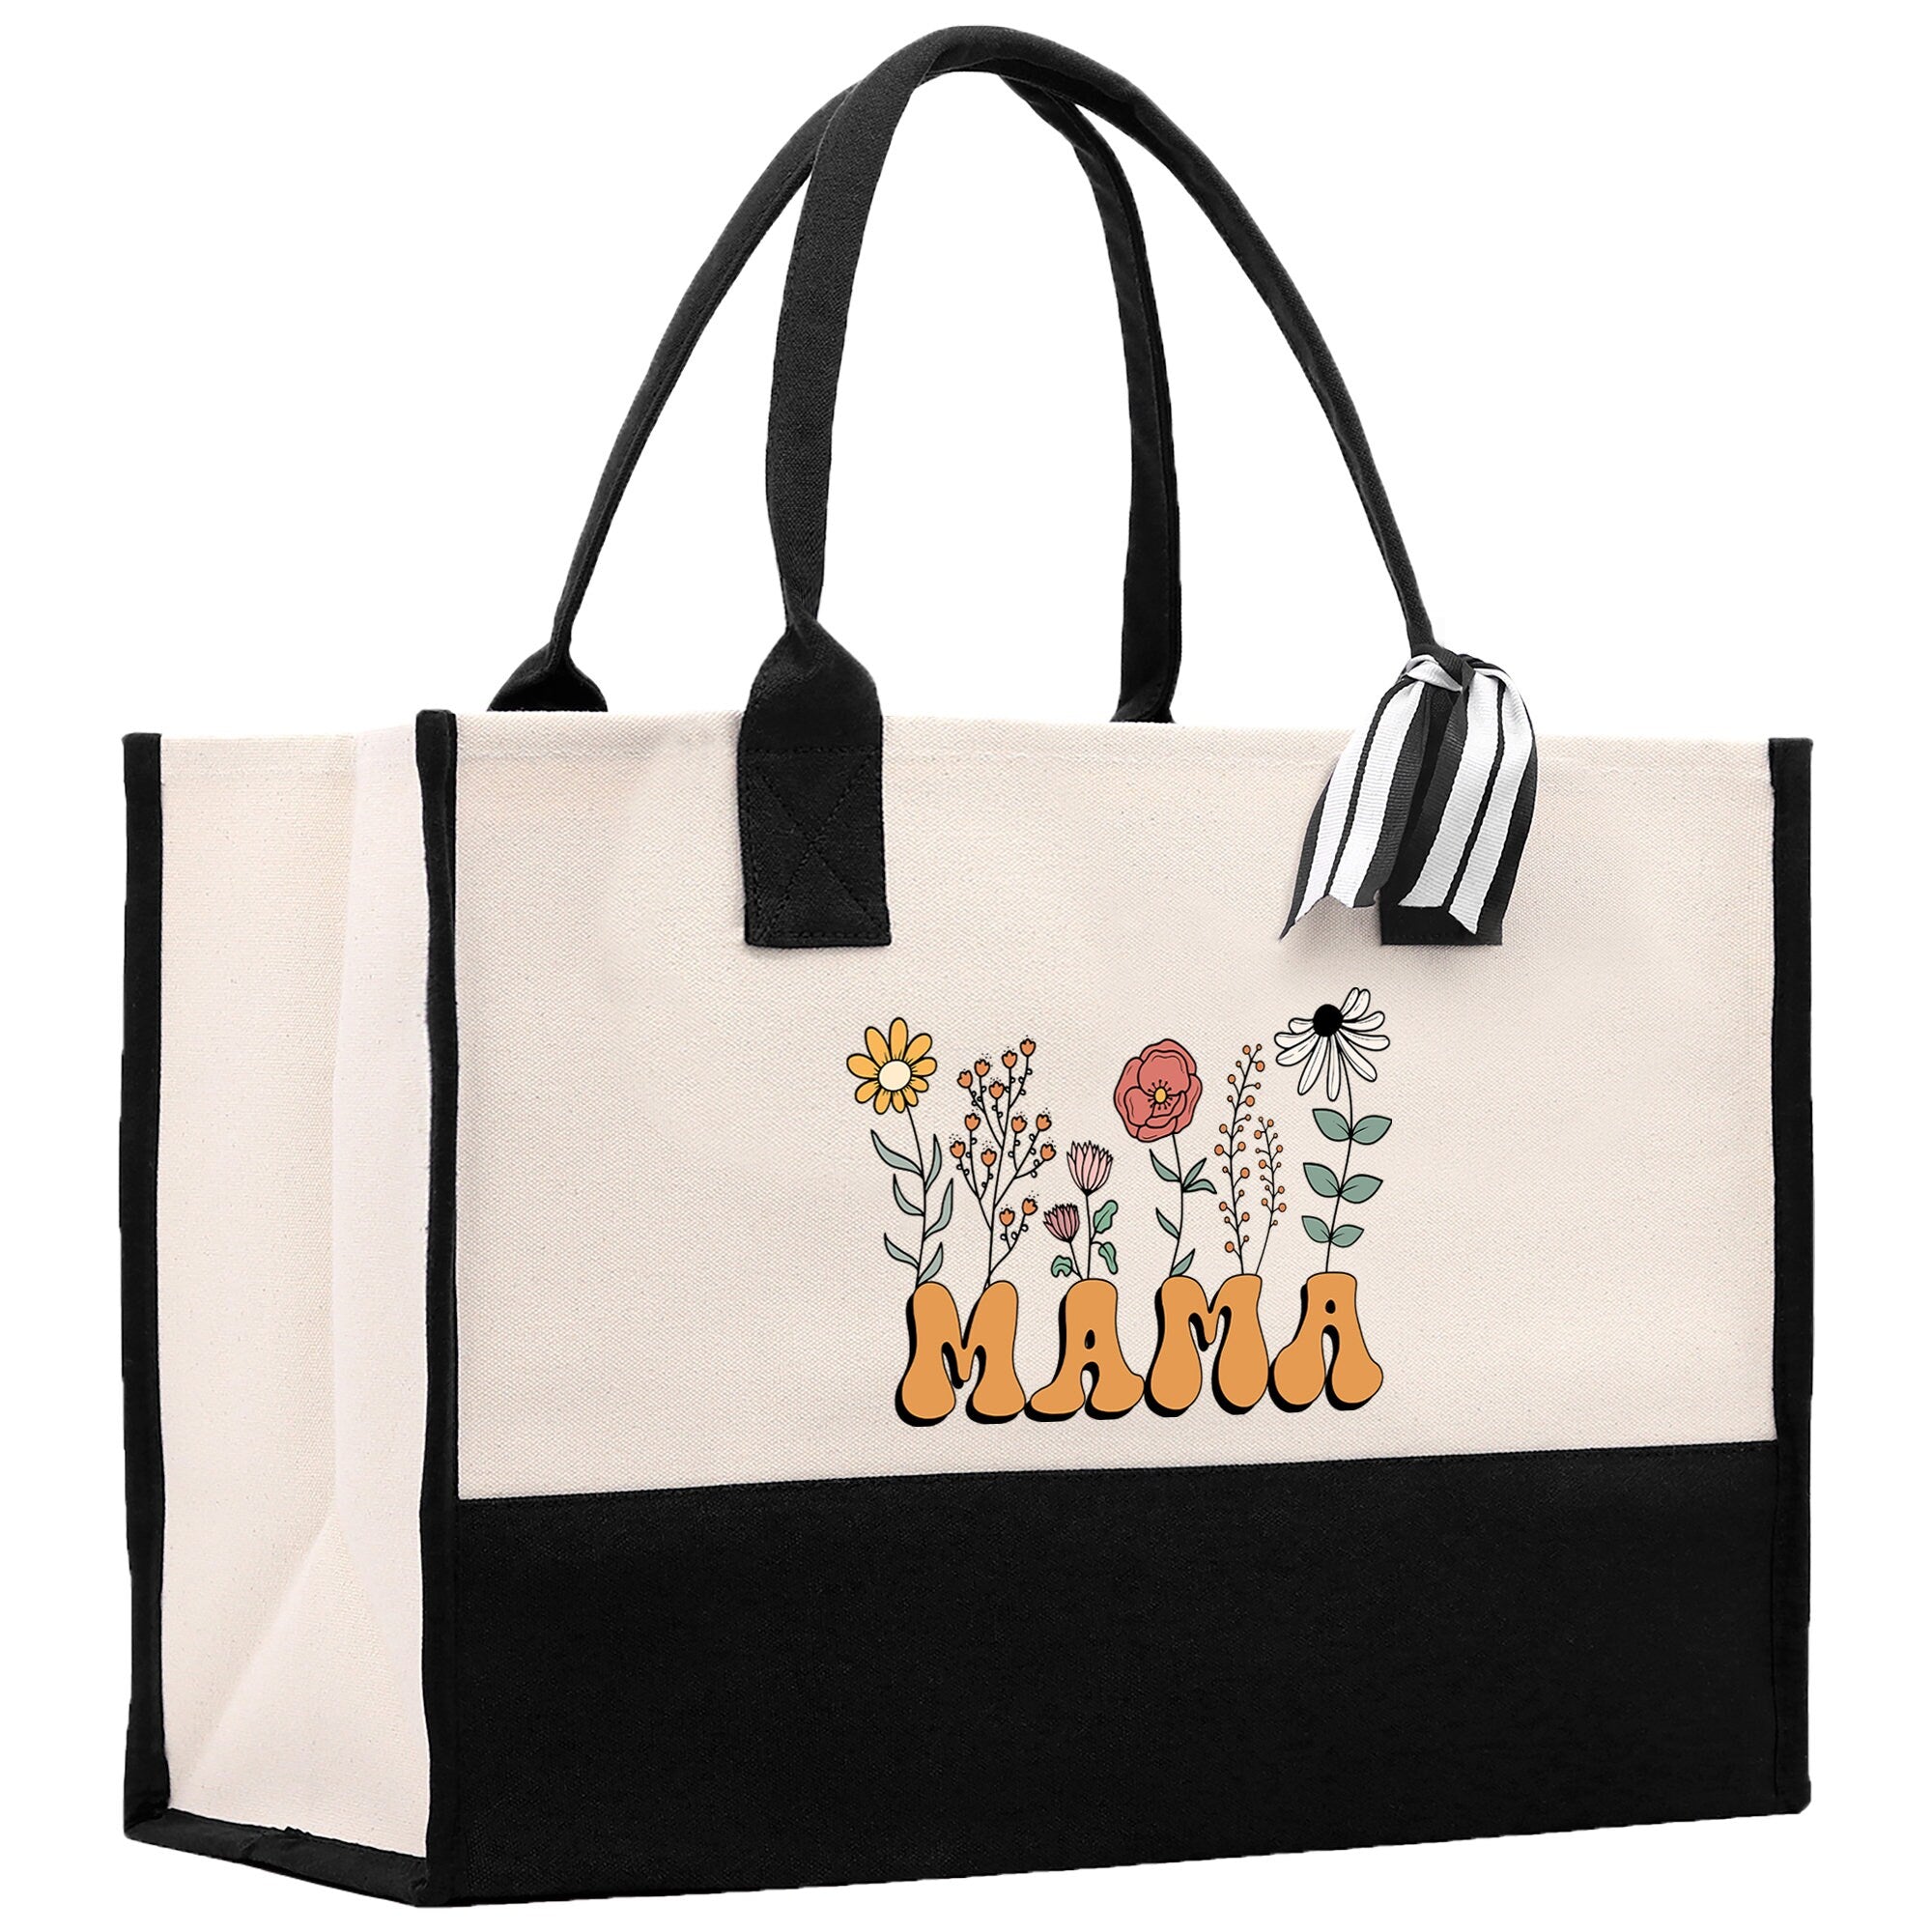 a black and white tote bag with a flower design